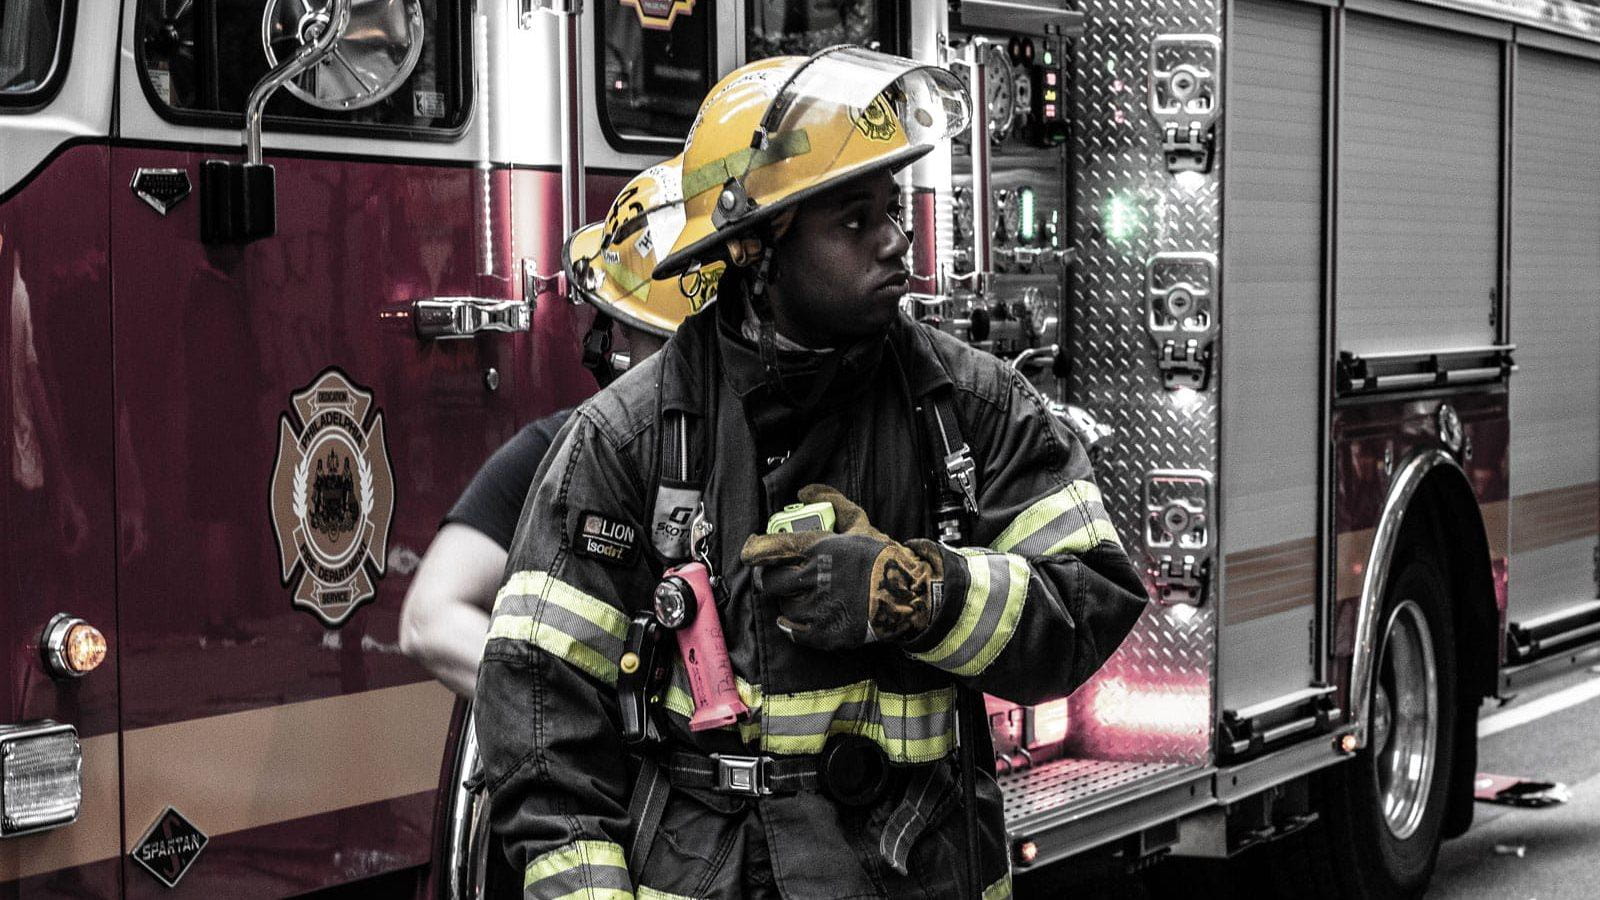 A firefighter stands in front of a fire truck.